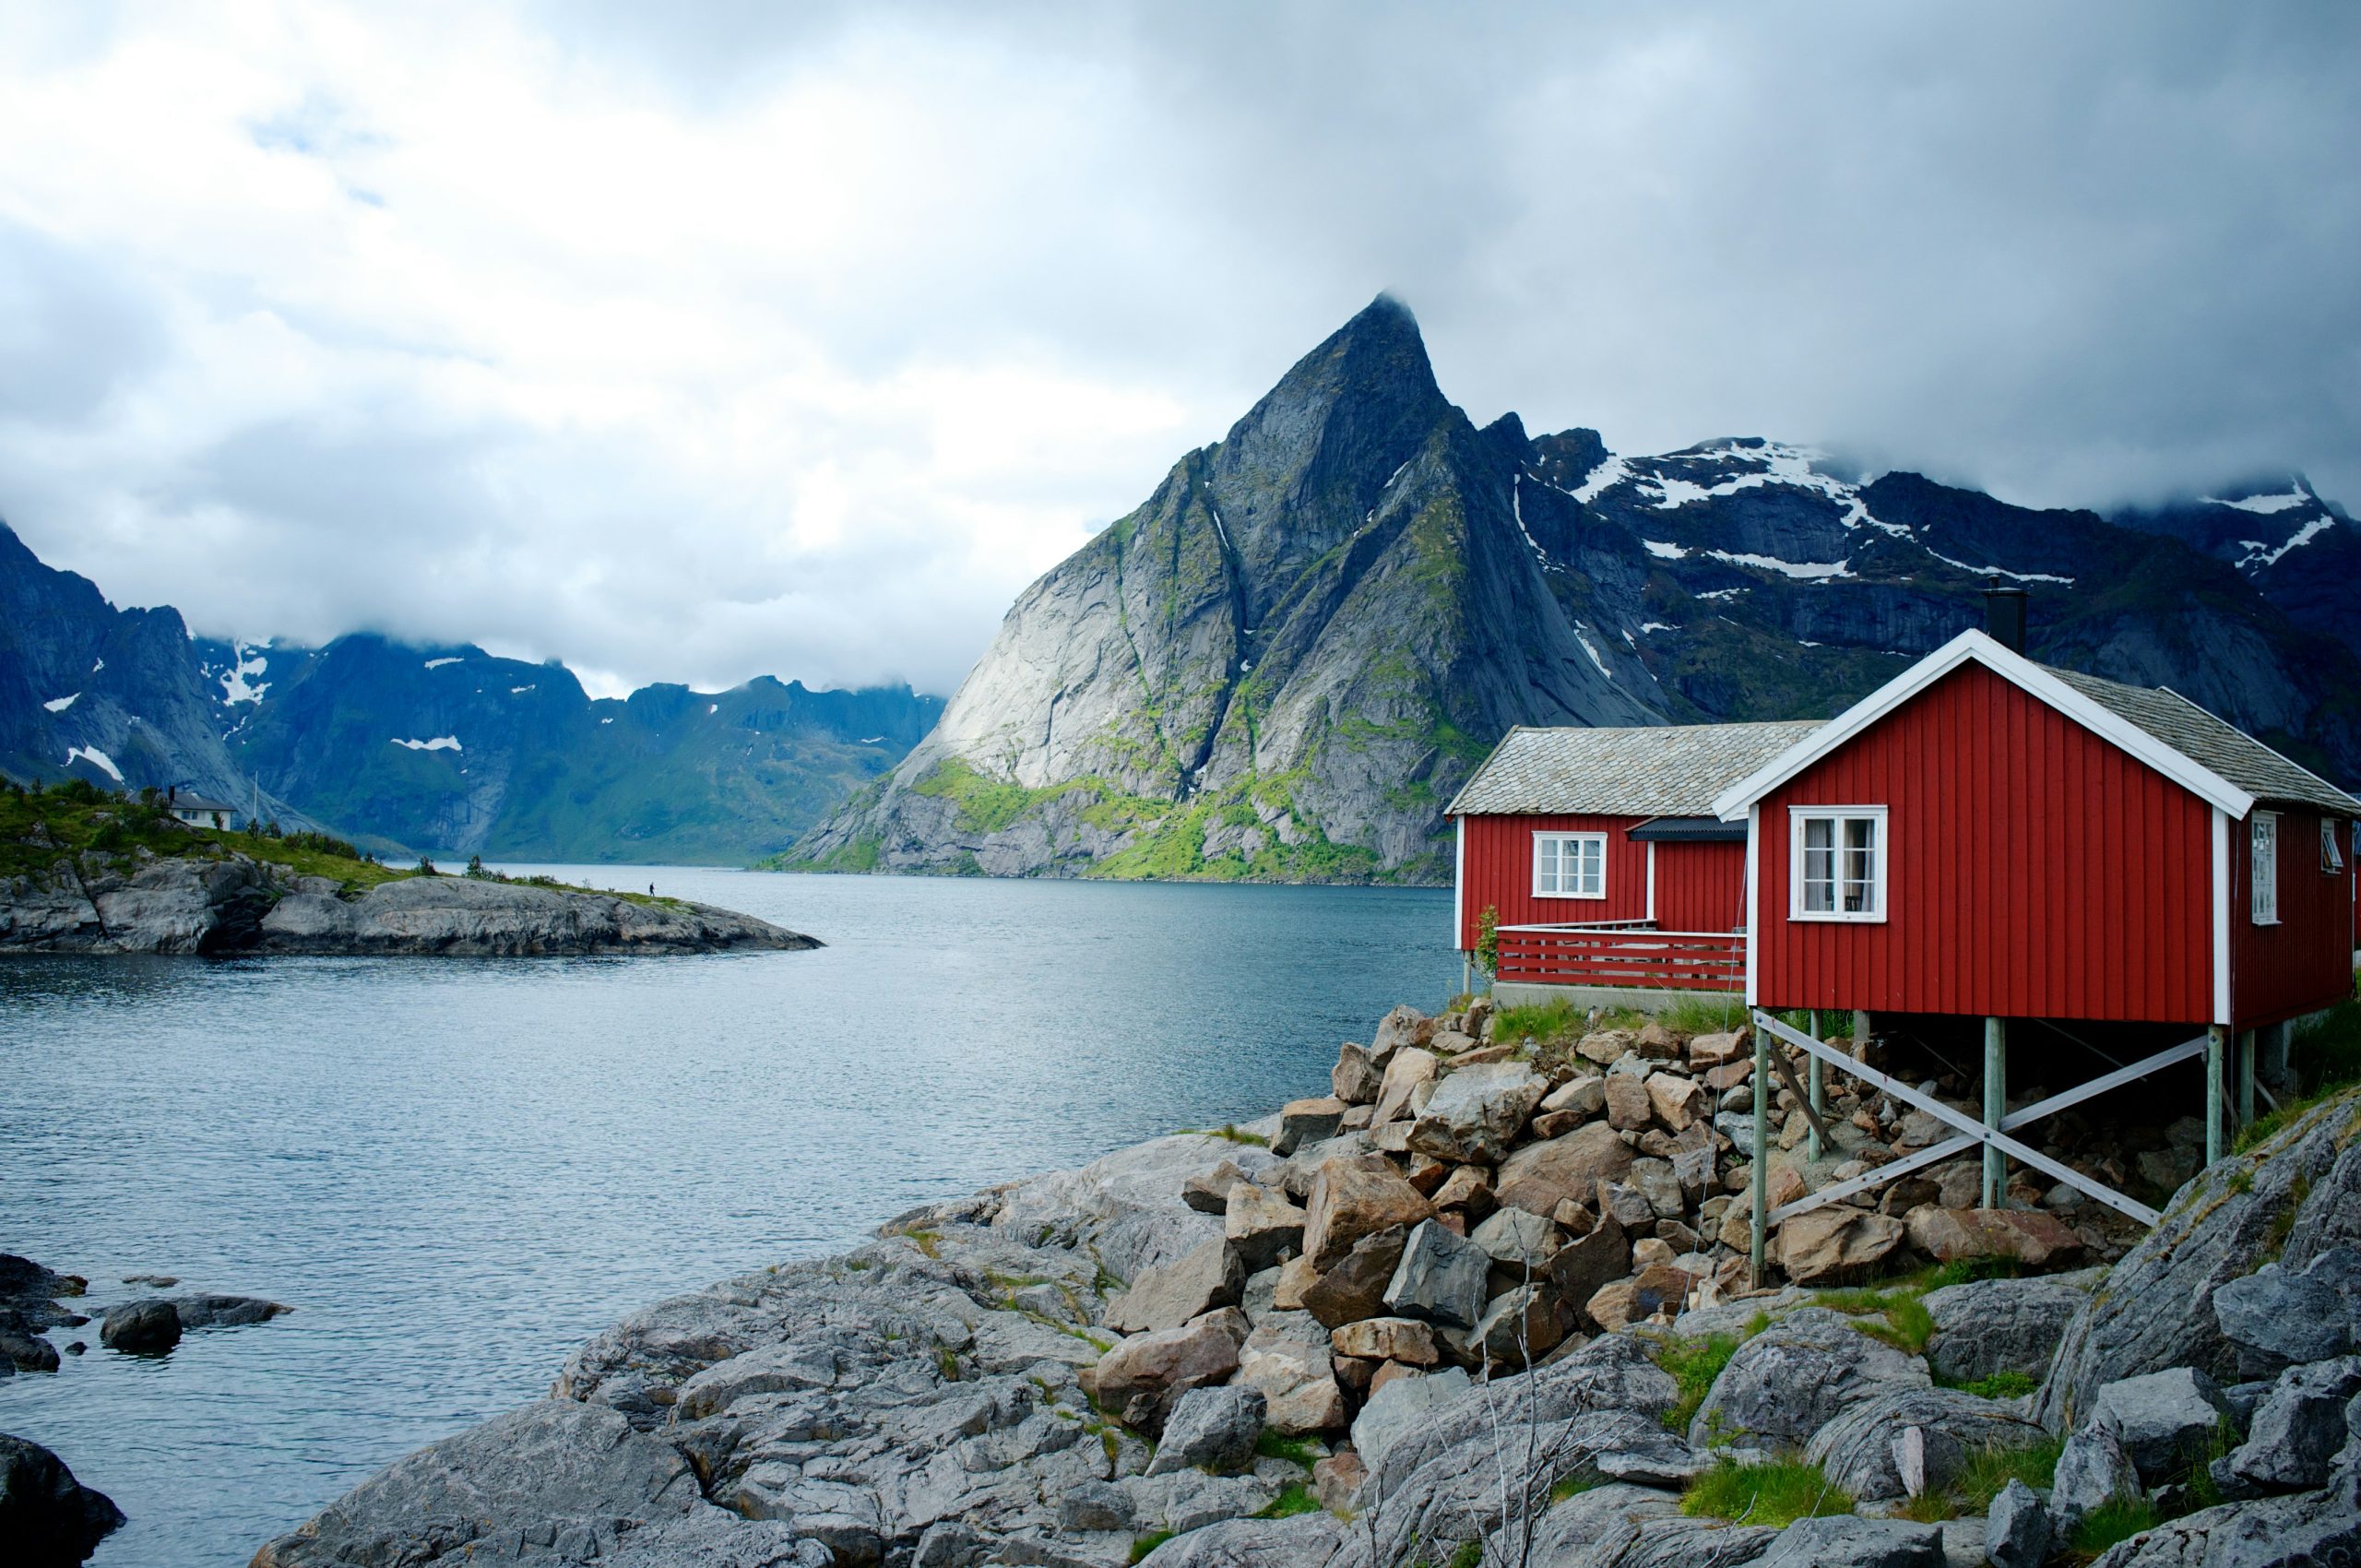 explore the breathtaking beauty of norway's fjords, where majestic cliffs meet tranquil waters in a natural wonderland.